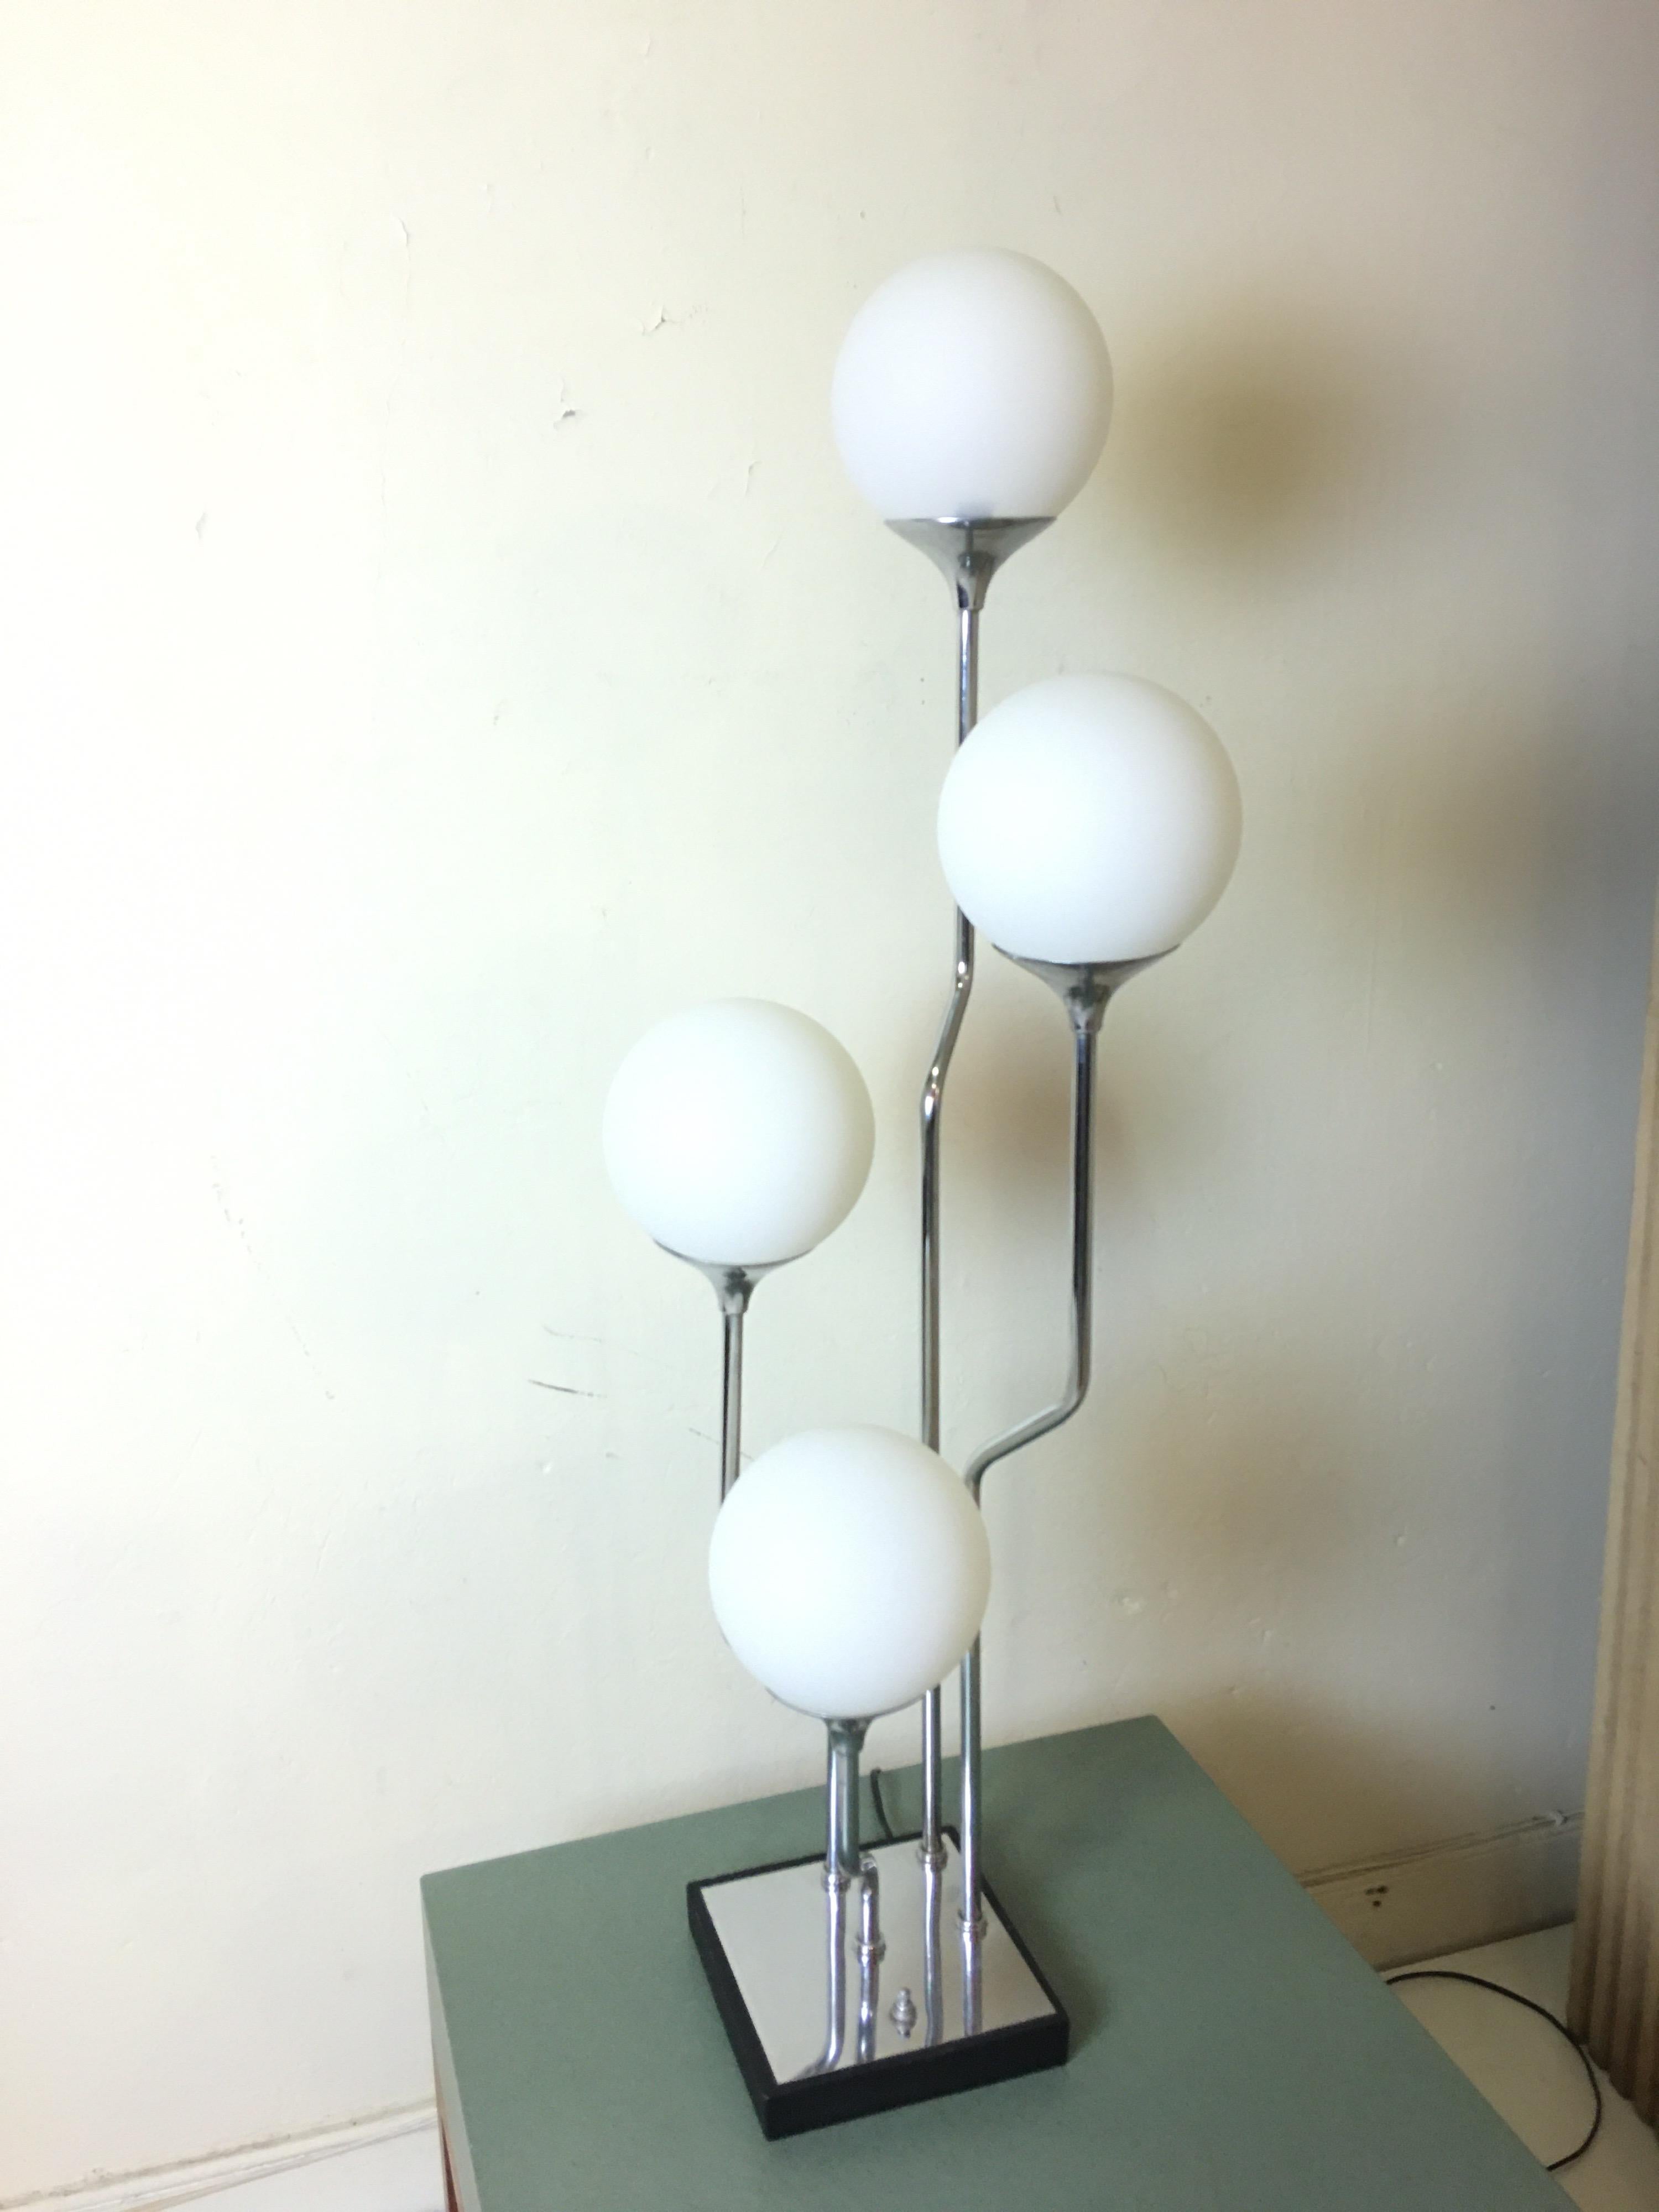 !960s or 1970s chrome table lamp with 4 frosted 6